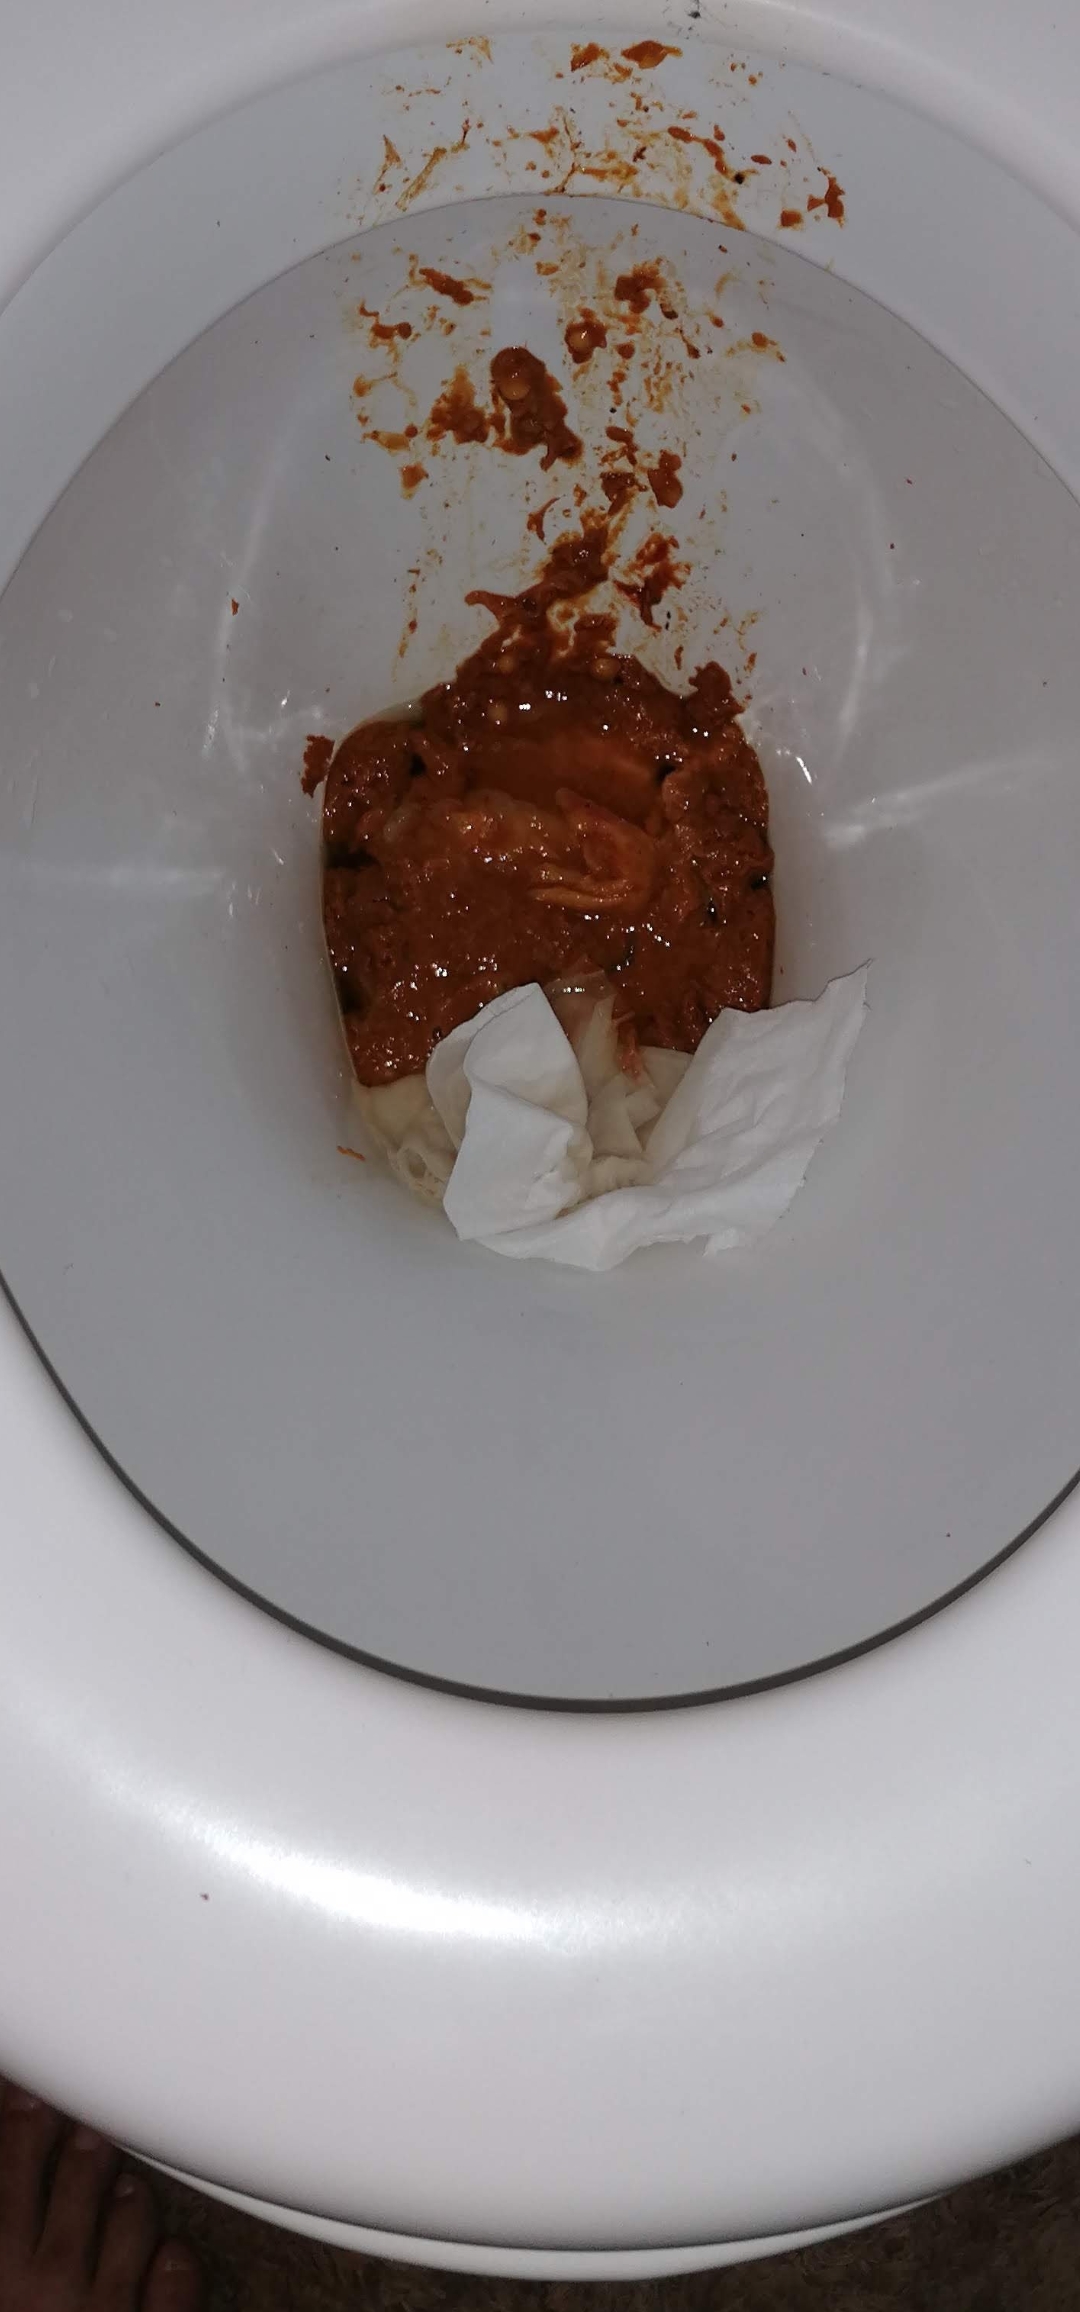 Very badly needed stomach ache shit on mates loo in the early hours just